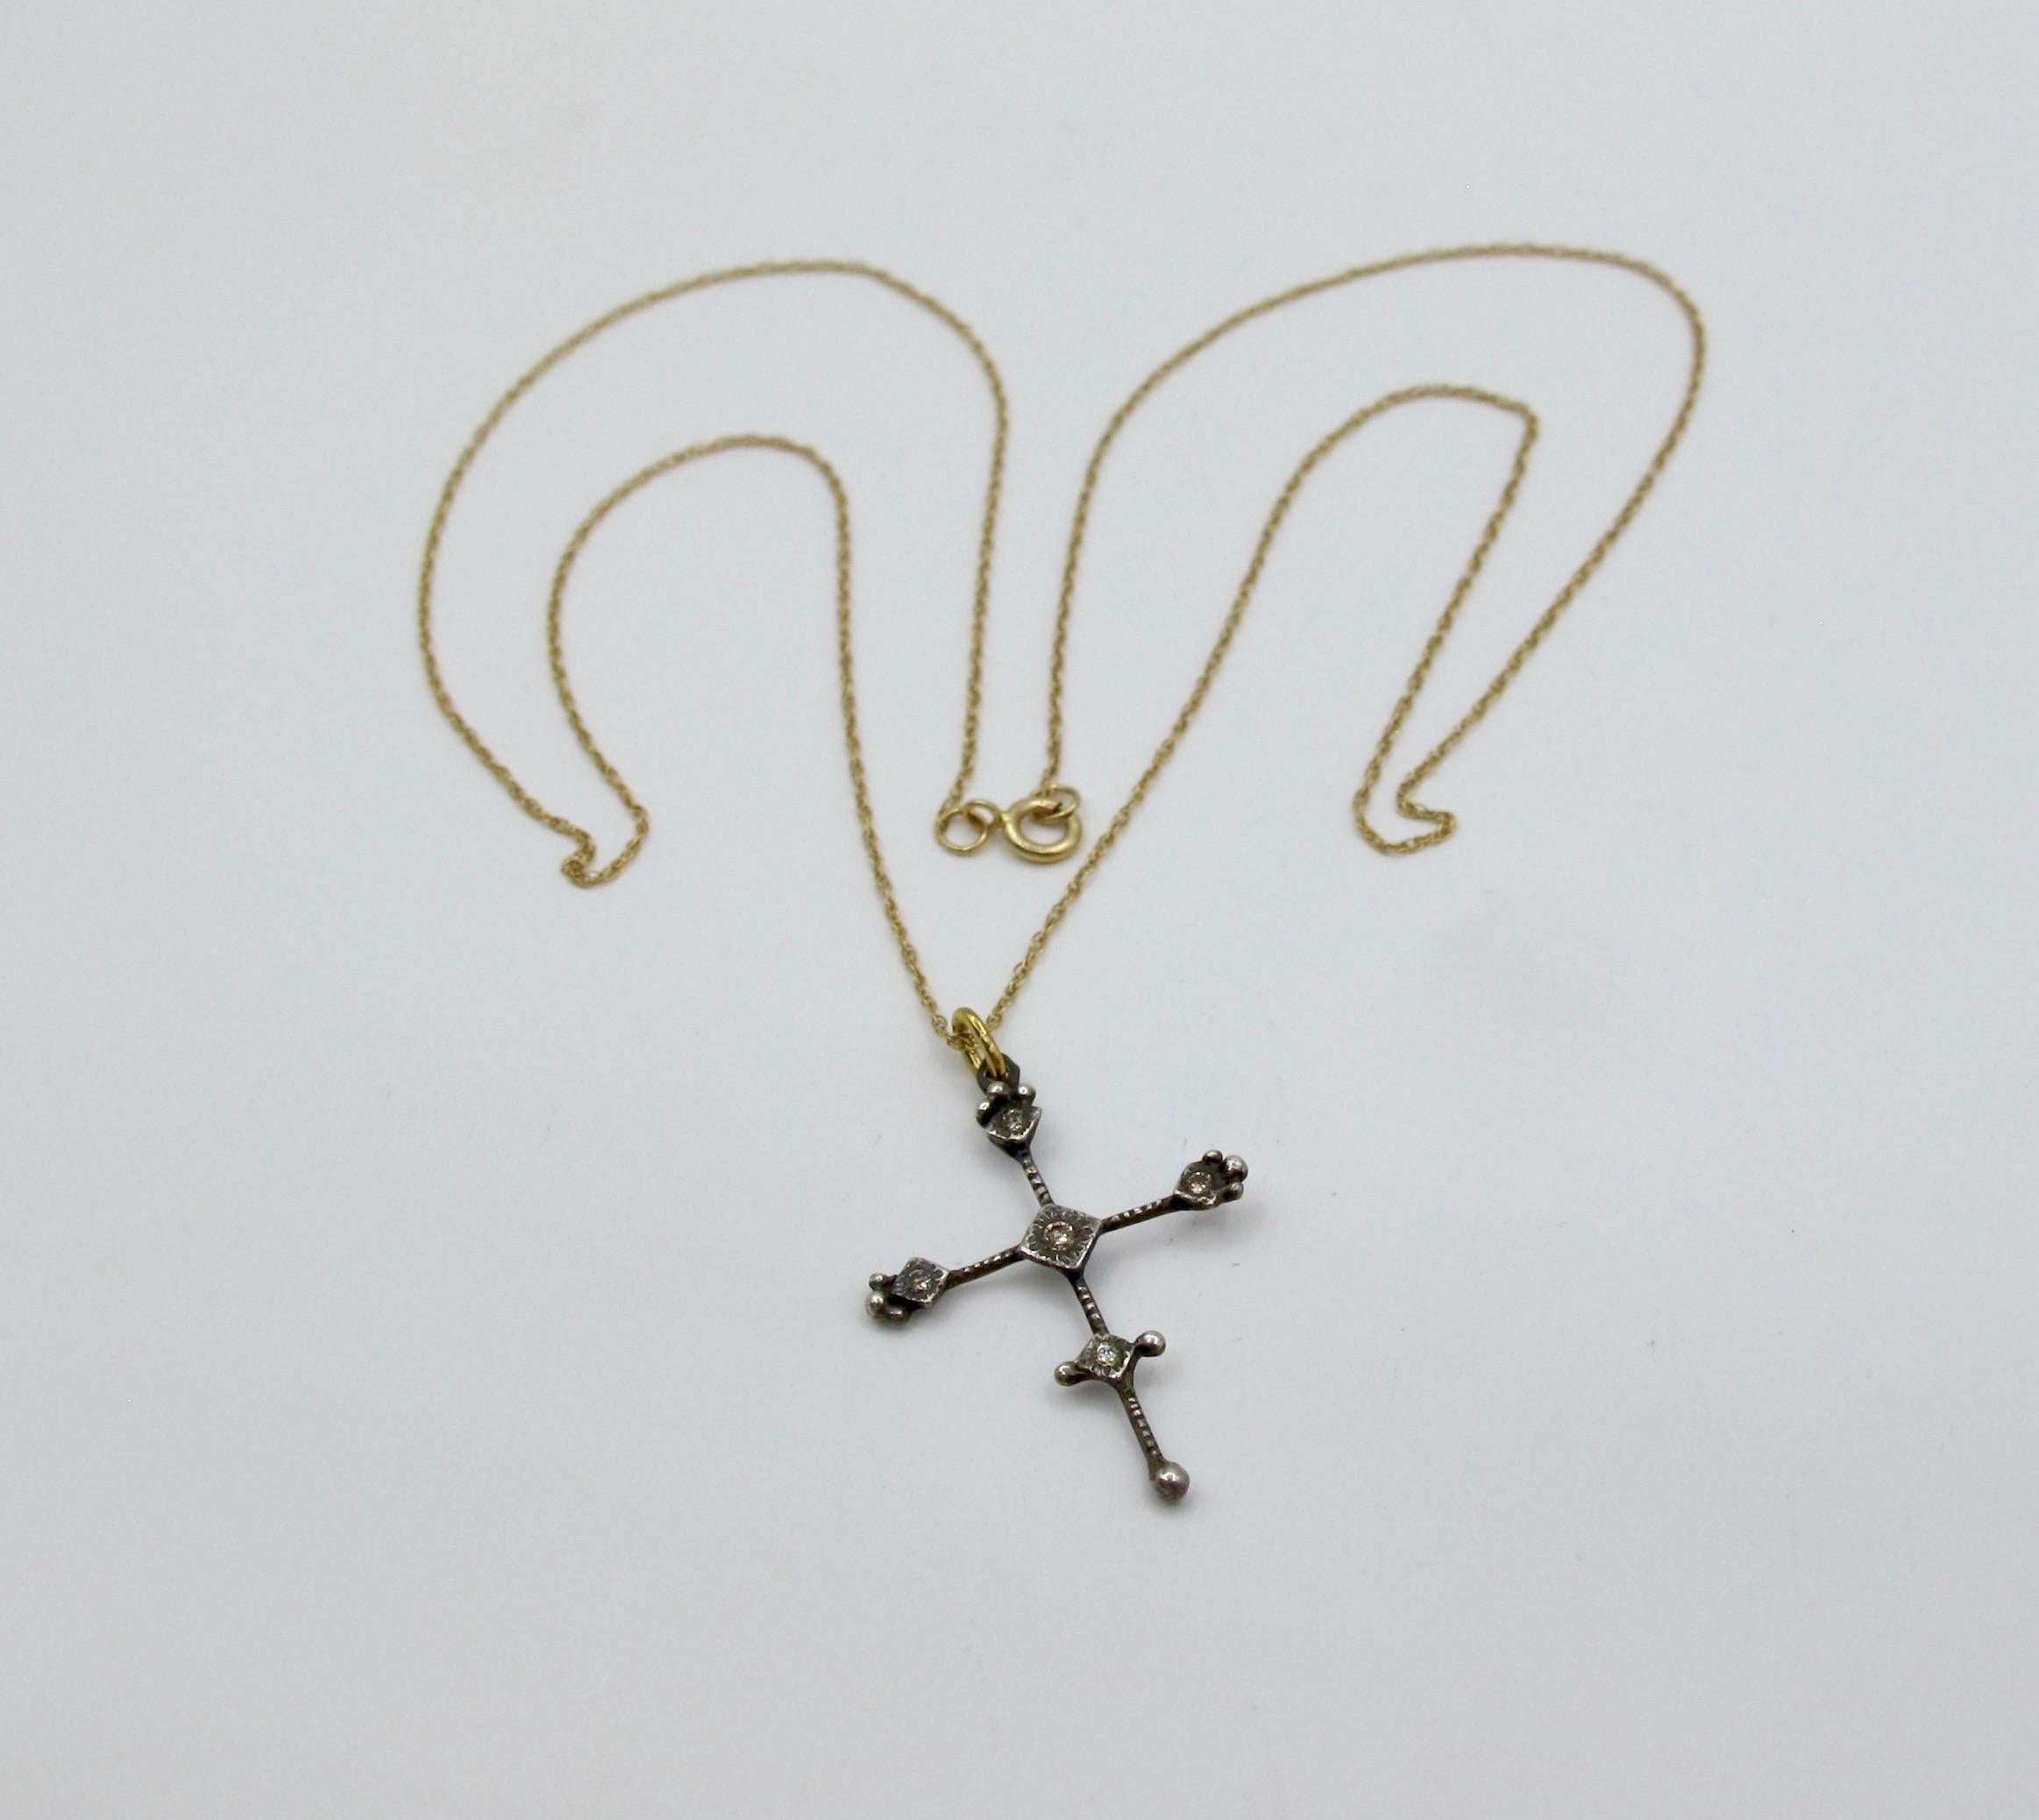 Rima Jewels' signature small delicate sterling silver cross set with bright champagne diamonds and strung on a fine 18